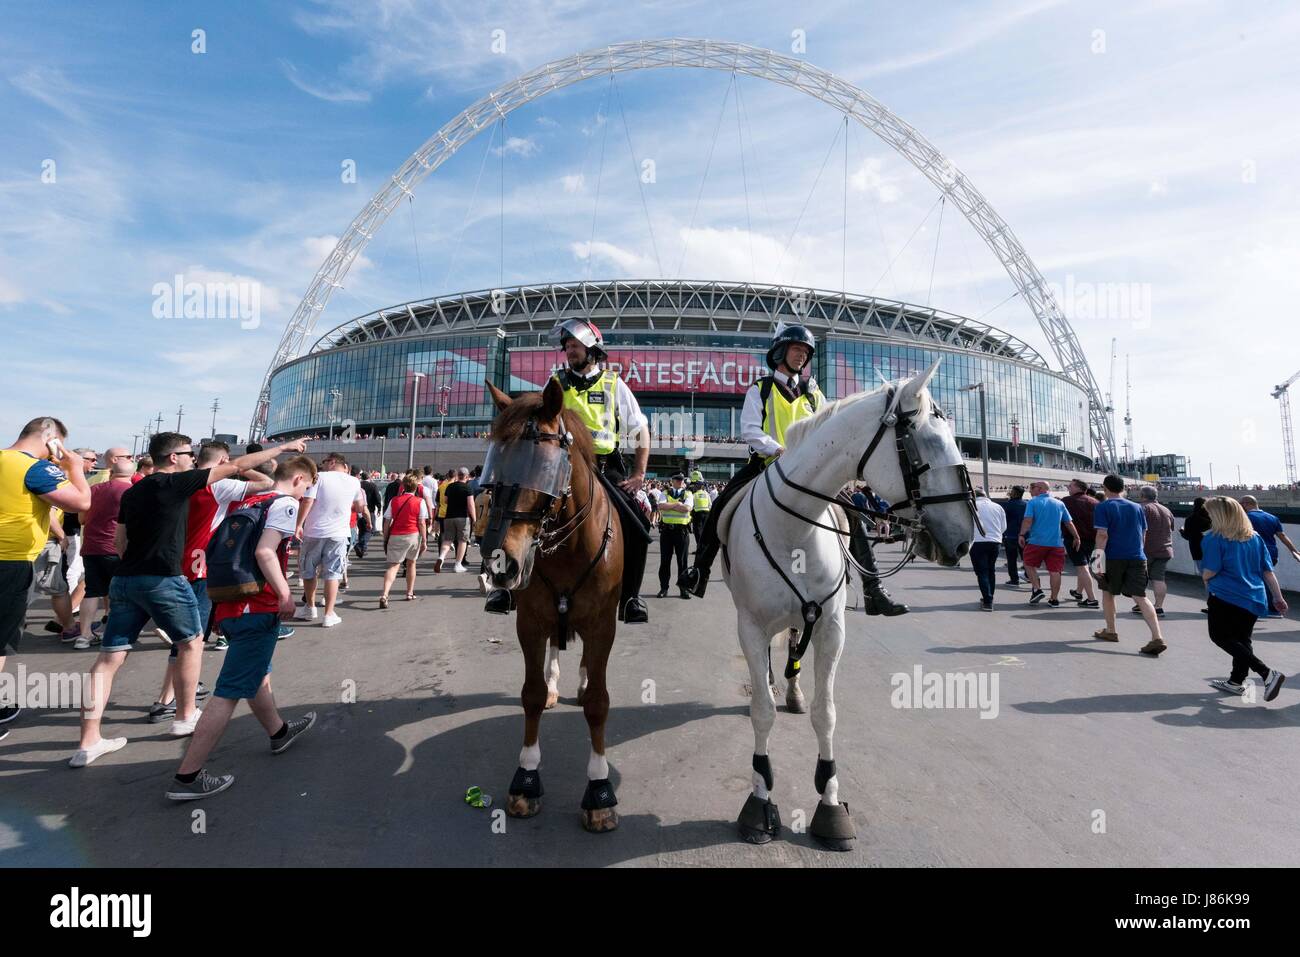 London, Britain. 27th May, 2017. Mounted policemen are on patrol as security precautions are stepped up for Arsenal and Chelsea fans arriving at Wembley stadium for the FA Cup football finals in London, Britain, on May 27, 2017. The security level was in response to Manchester Arena bombing when 22 people died and 66 people were injured in one of the most deadly attacks in the UK. Credit: Ray Tang/Xinhua/Alamy Live News Stock Photo